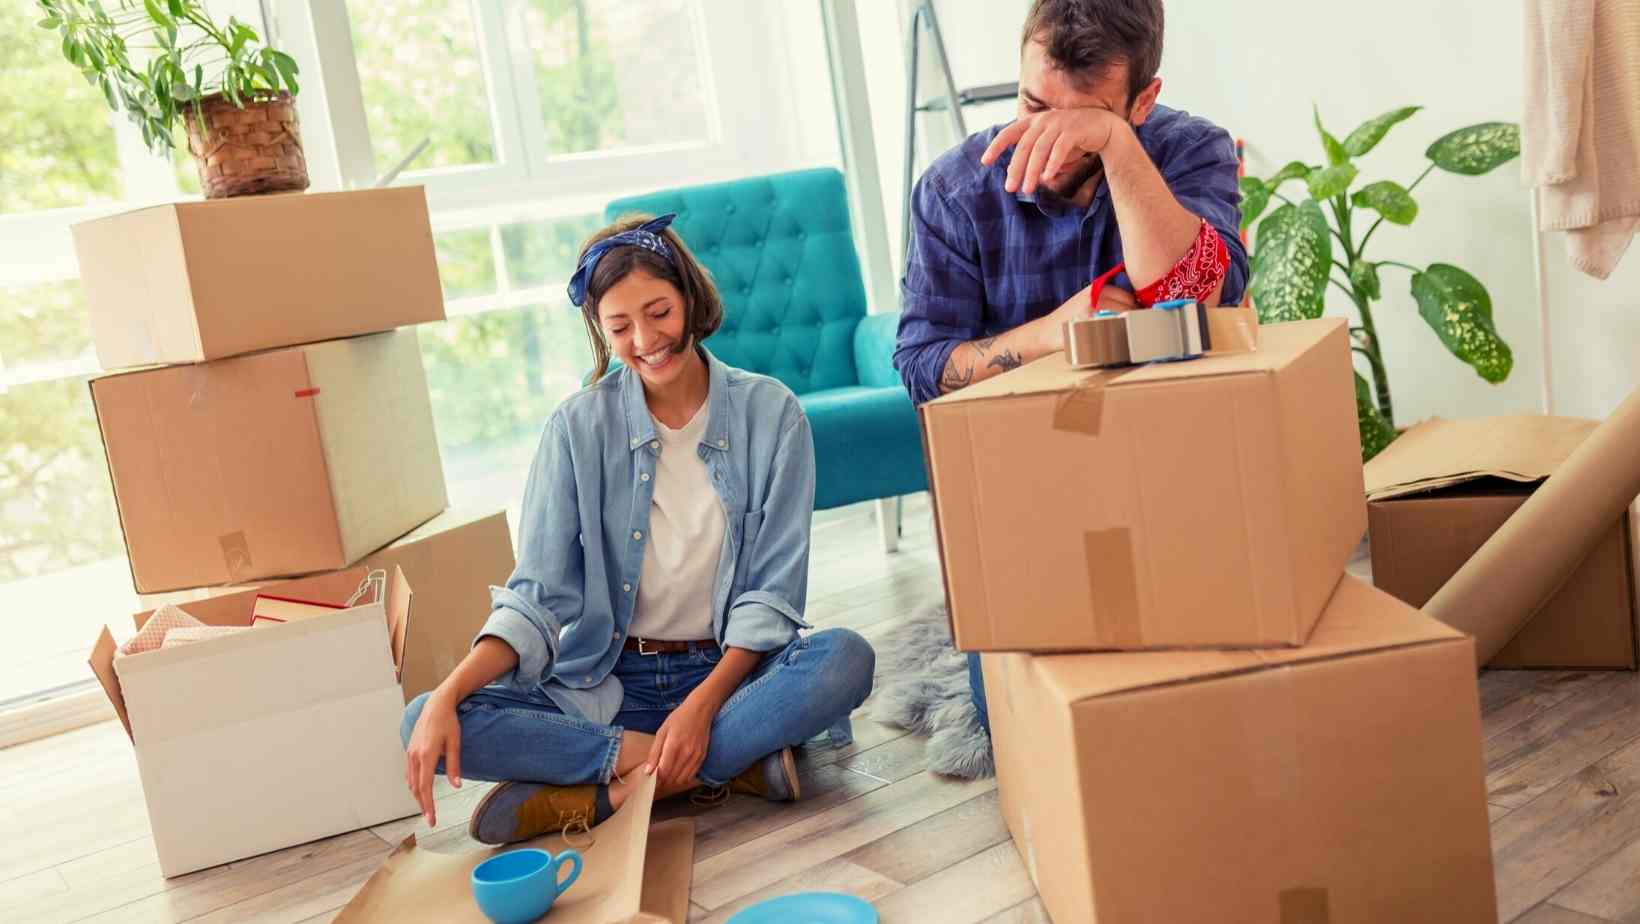 Essential Things You Need To Focus On While Moving